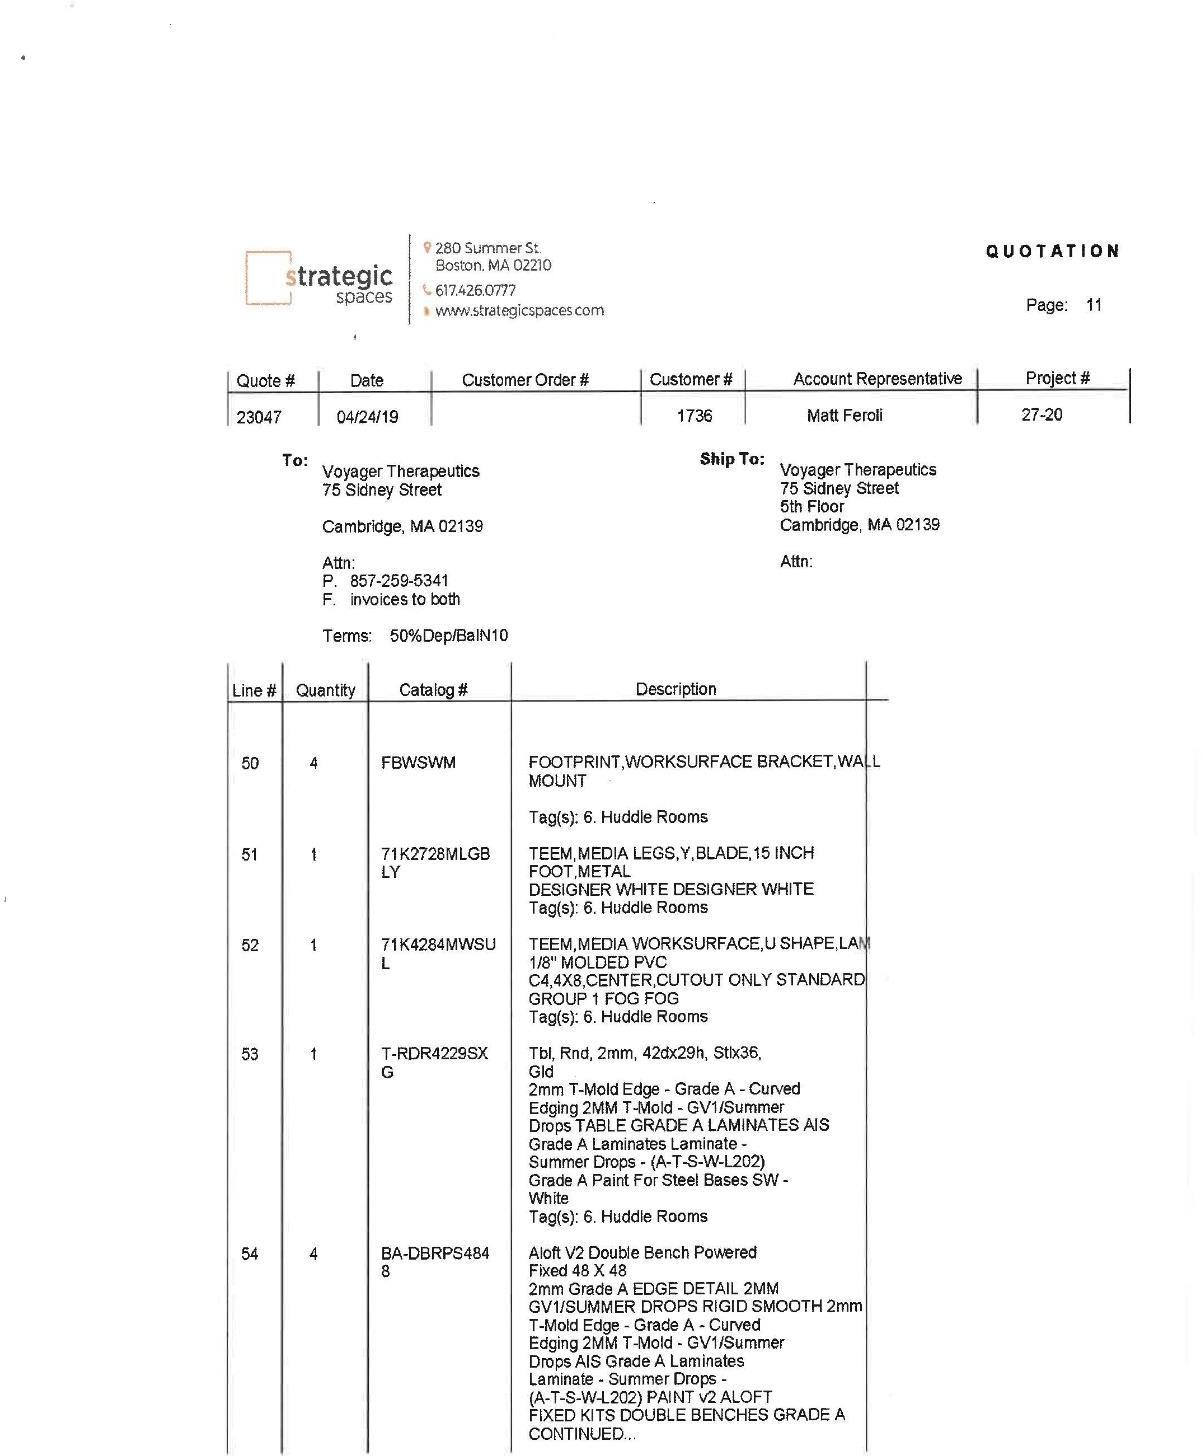 Ex C to Voyager BioNTech Sublease Agreement_Page_11